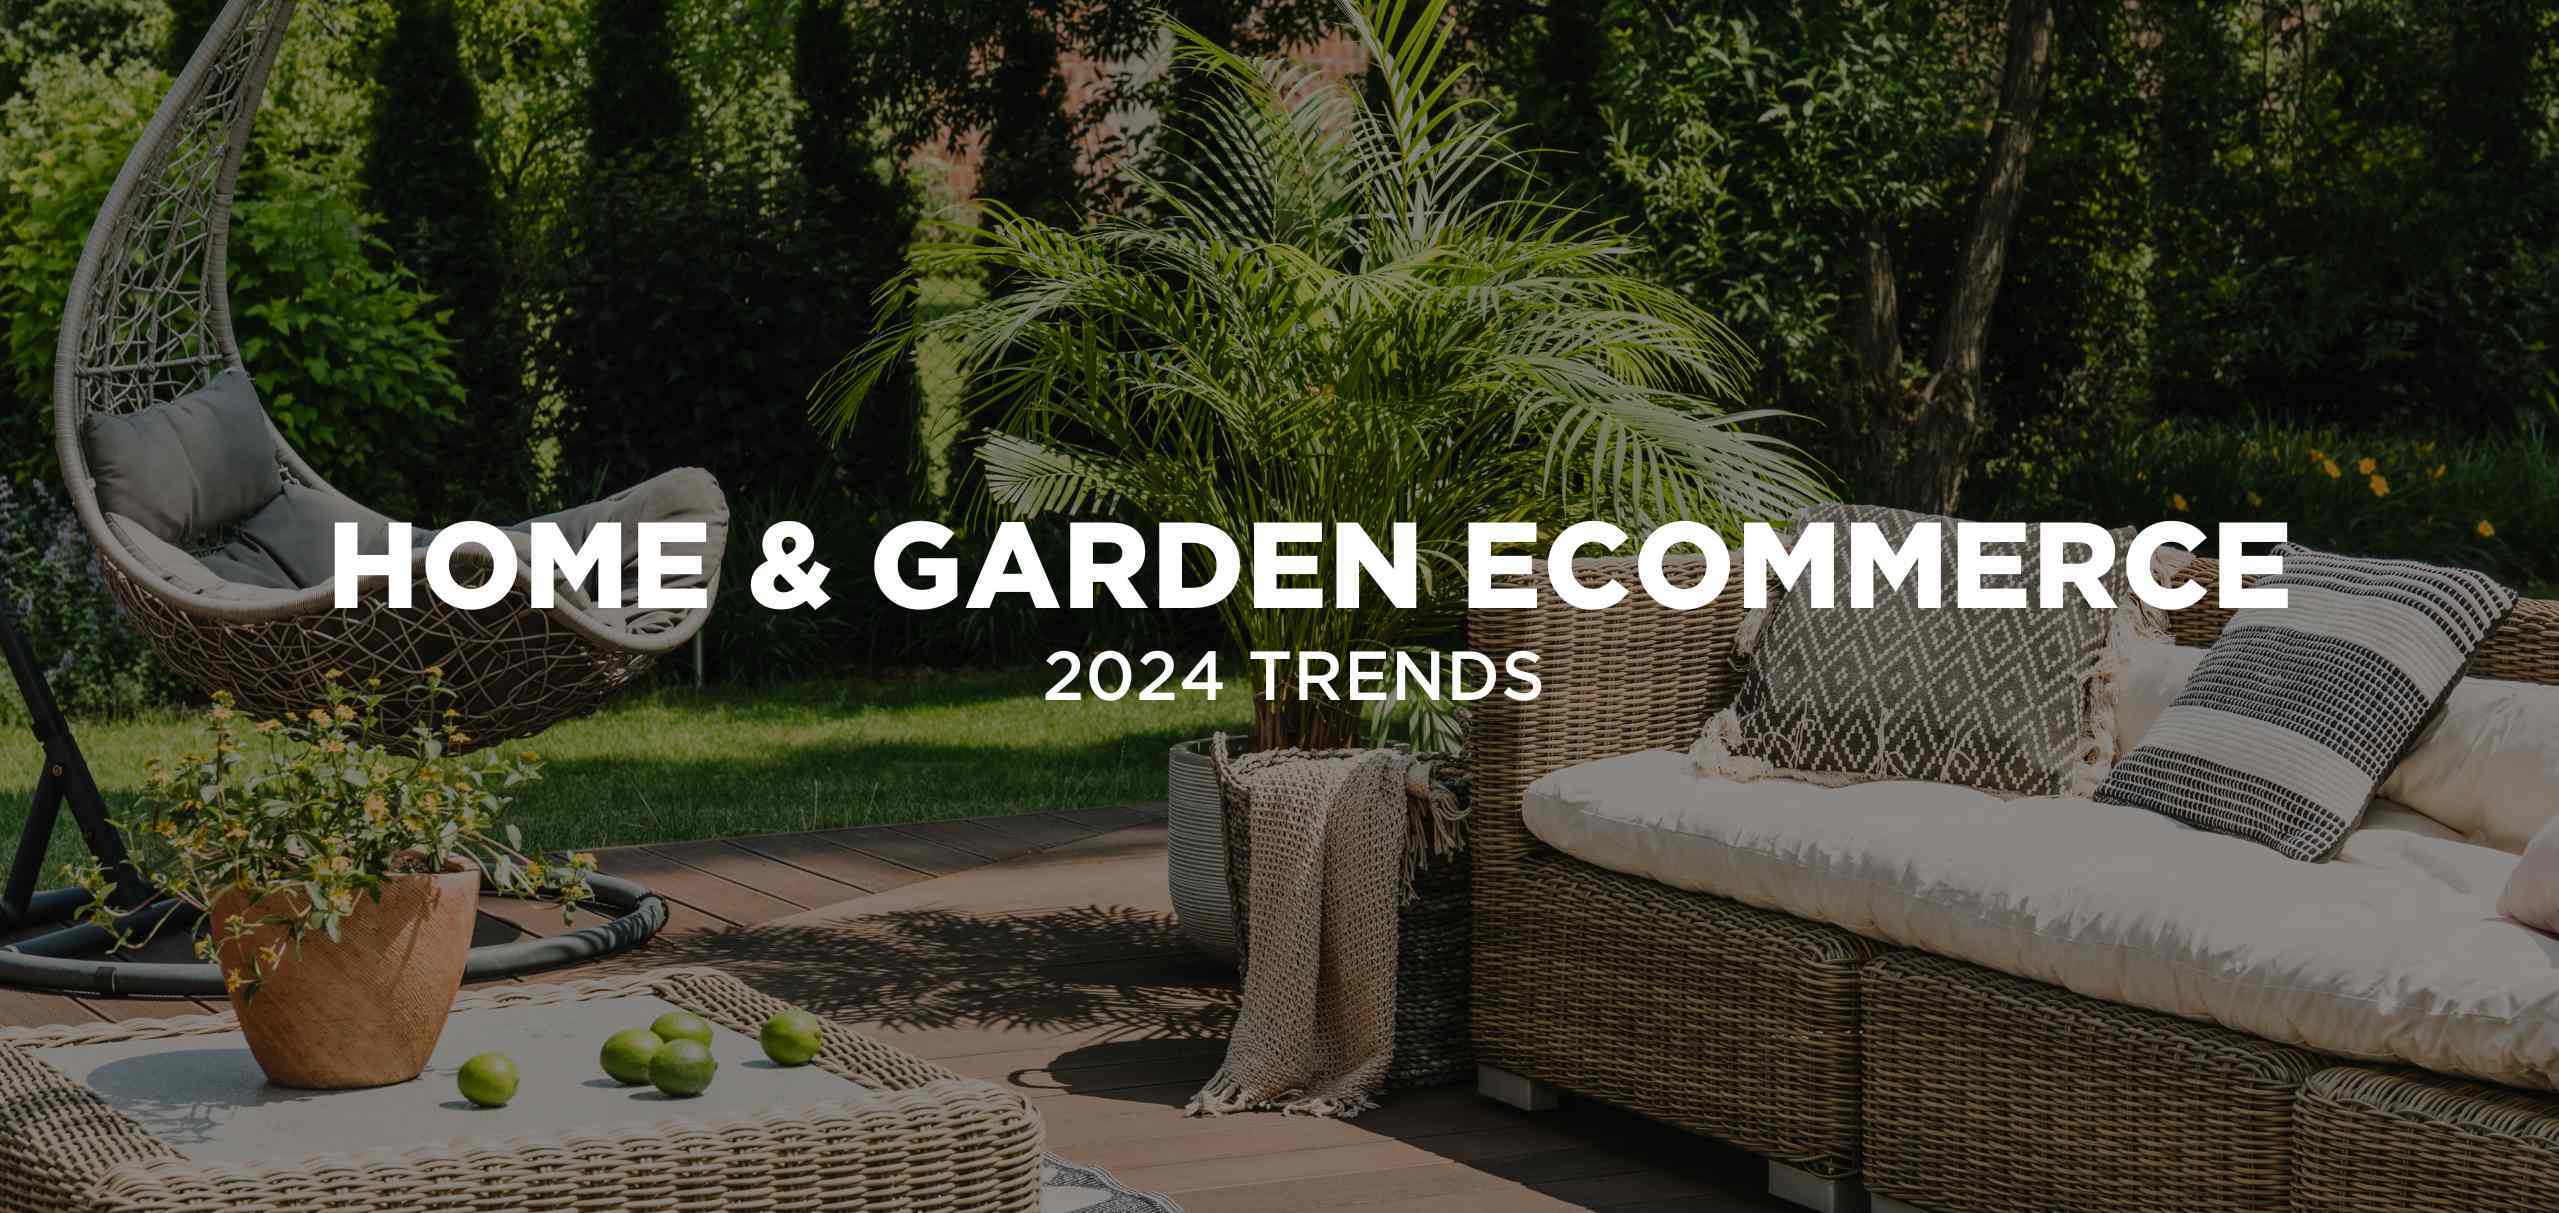 Cultivating Growth: Top Ecommerce Trends for the Home & Garden in 2024